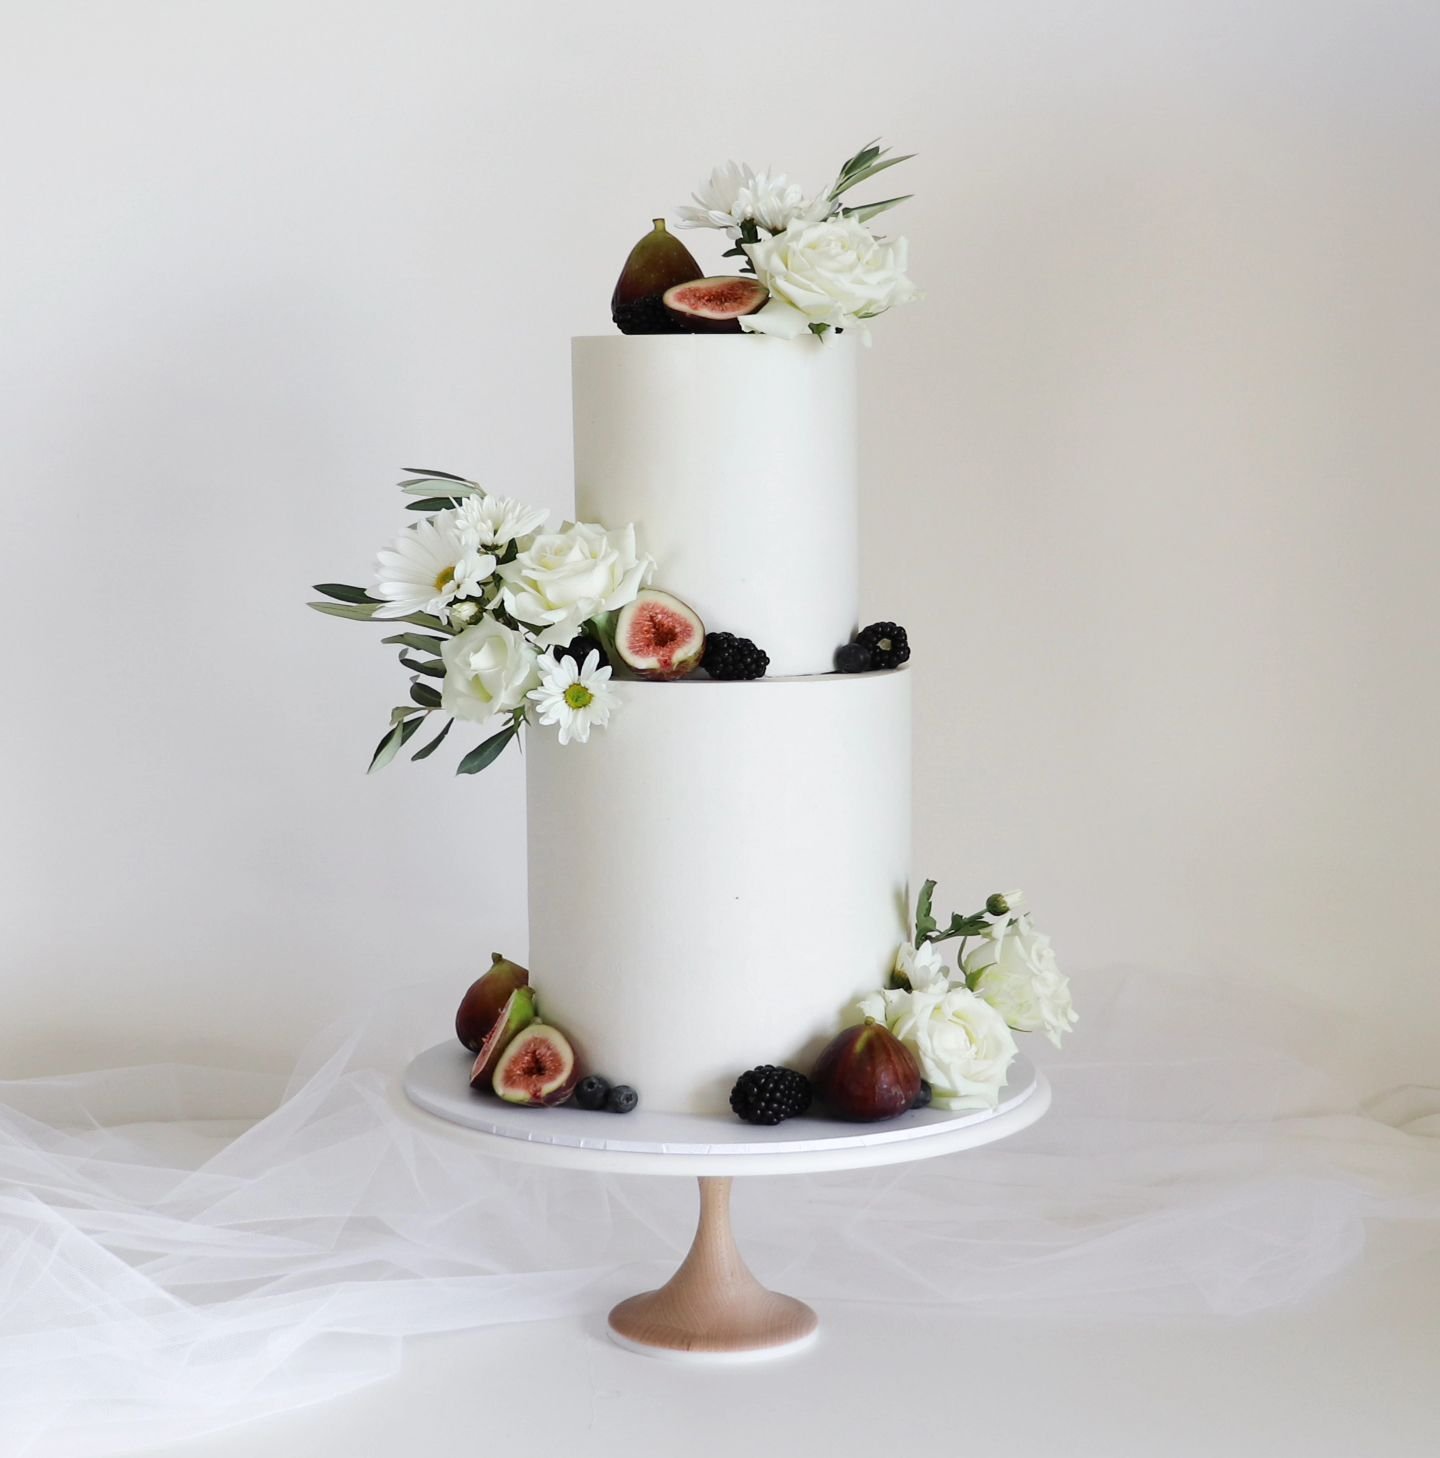 Figs, berries with white and green floral for Francesca &amp; Lucas' big day at @jackrabbitweddings 🥂

#geelongwedding #weddingcake #geelongcakes #wedding #floralcakes #cakedesign